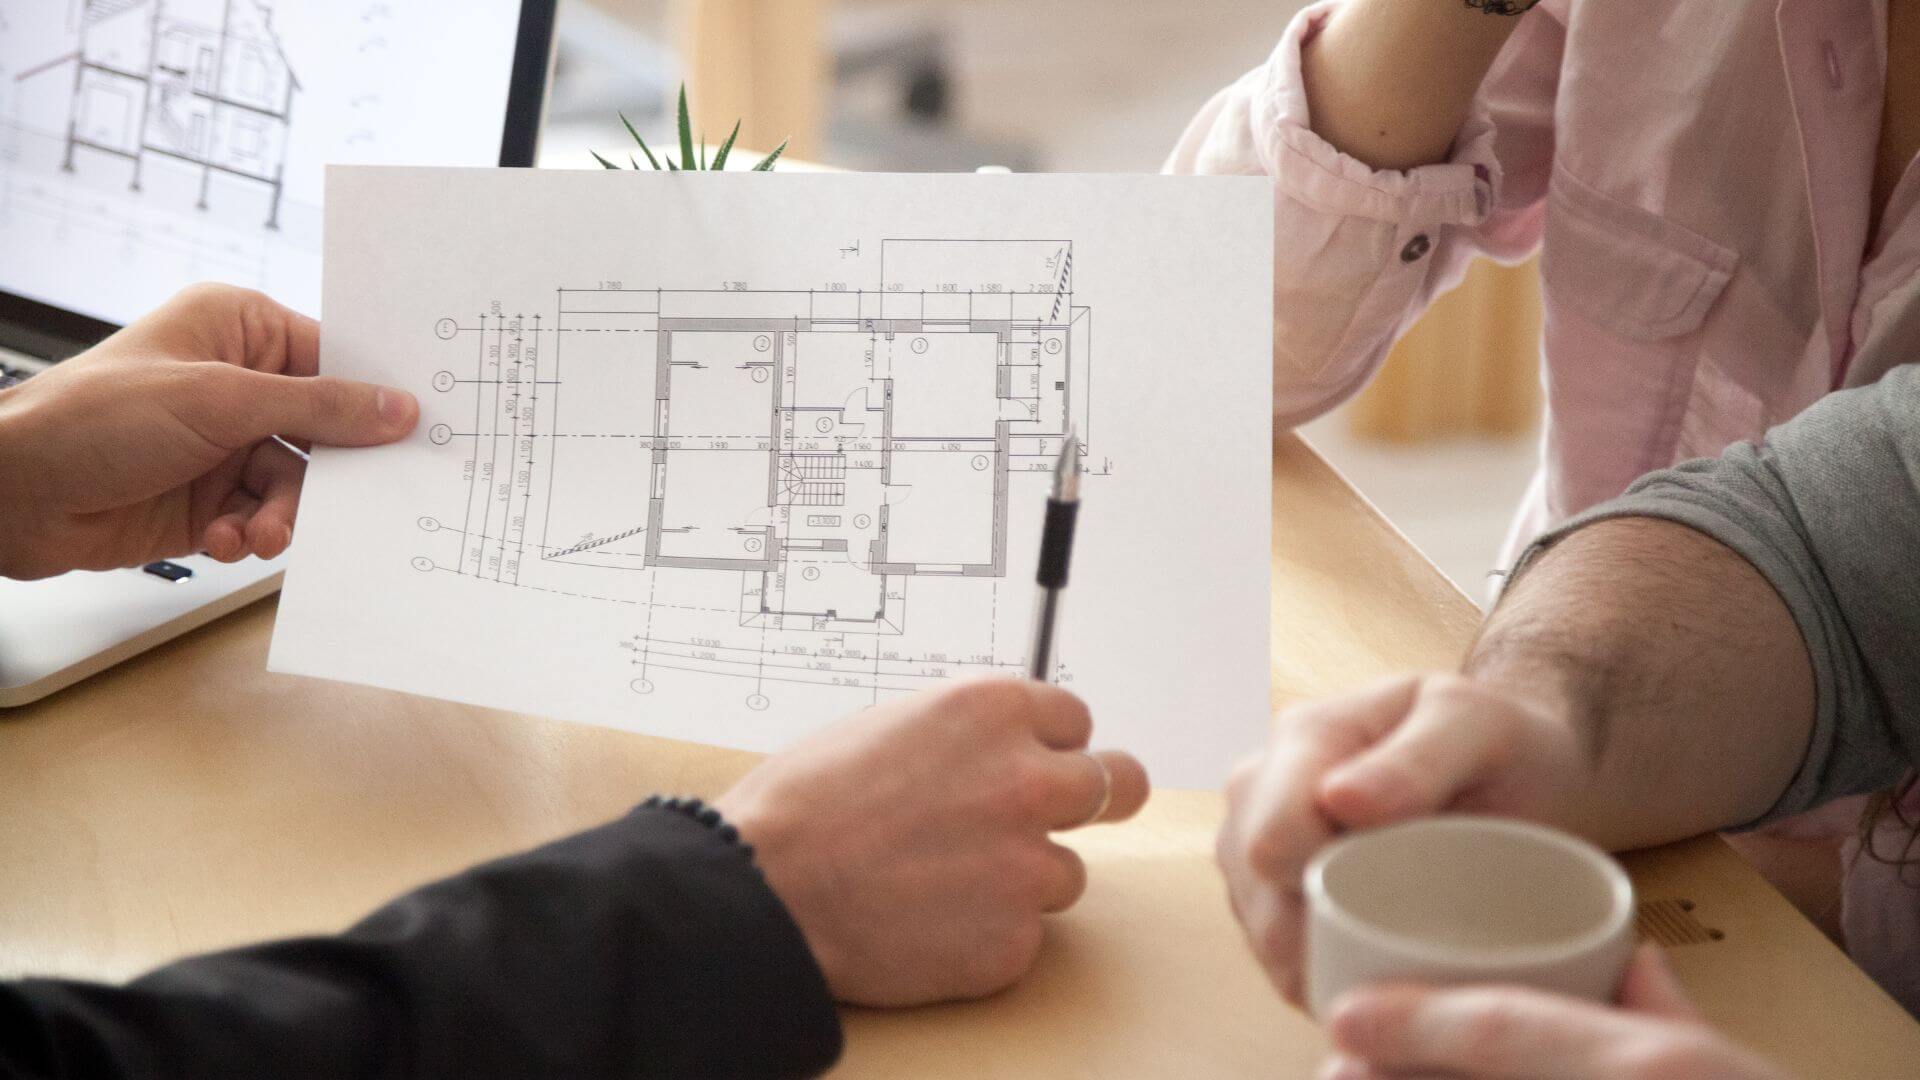 A close-up photo showing two individuals reviewing a detailed architectural floor plan. One person holds the blueprint steady on a wooden table, while the other, holding a pen, appears to be discussing specific aspects of the design. The blueprint is rich with technical measurements and layout details, suggesting a planning or consultation phase for property renovation or development.